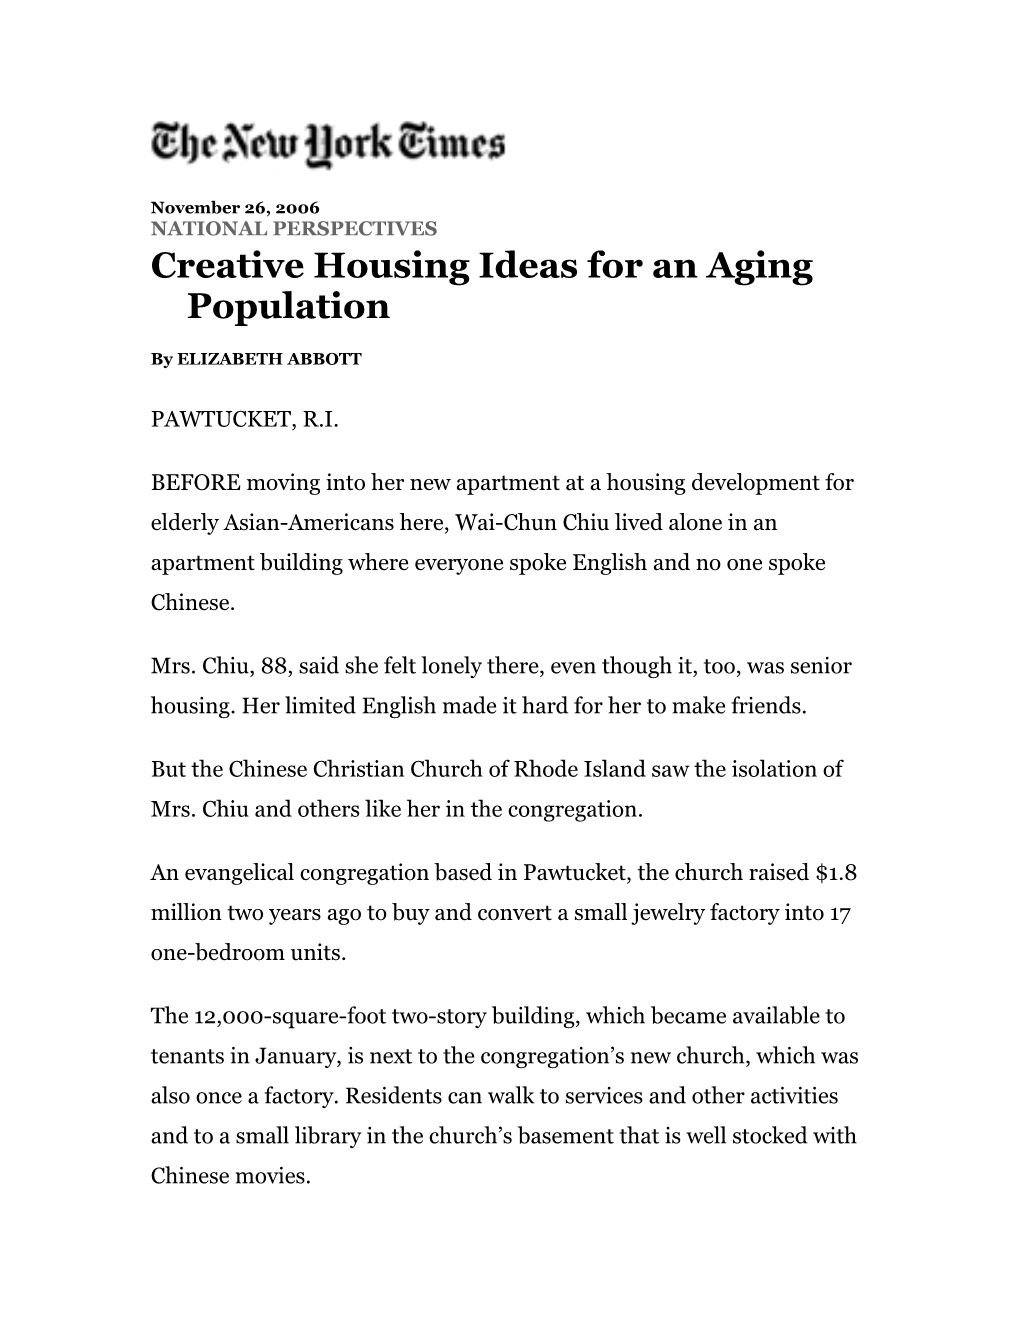 Creative Housing Ideas for an Aging Population